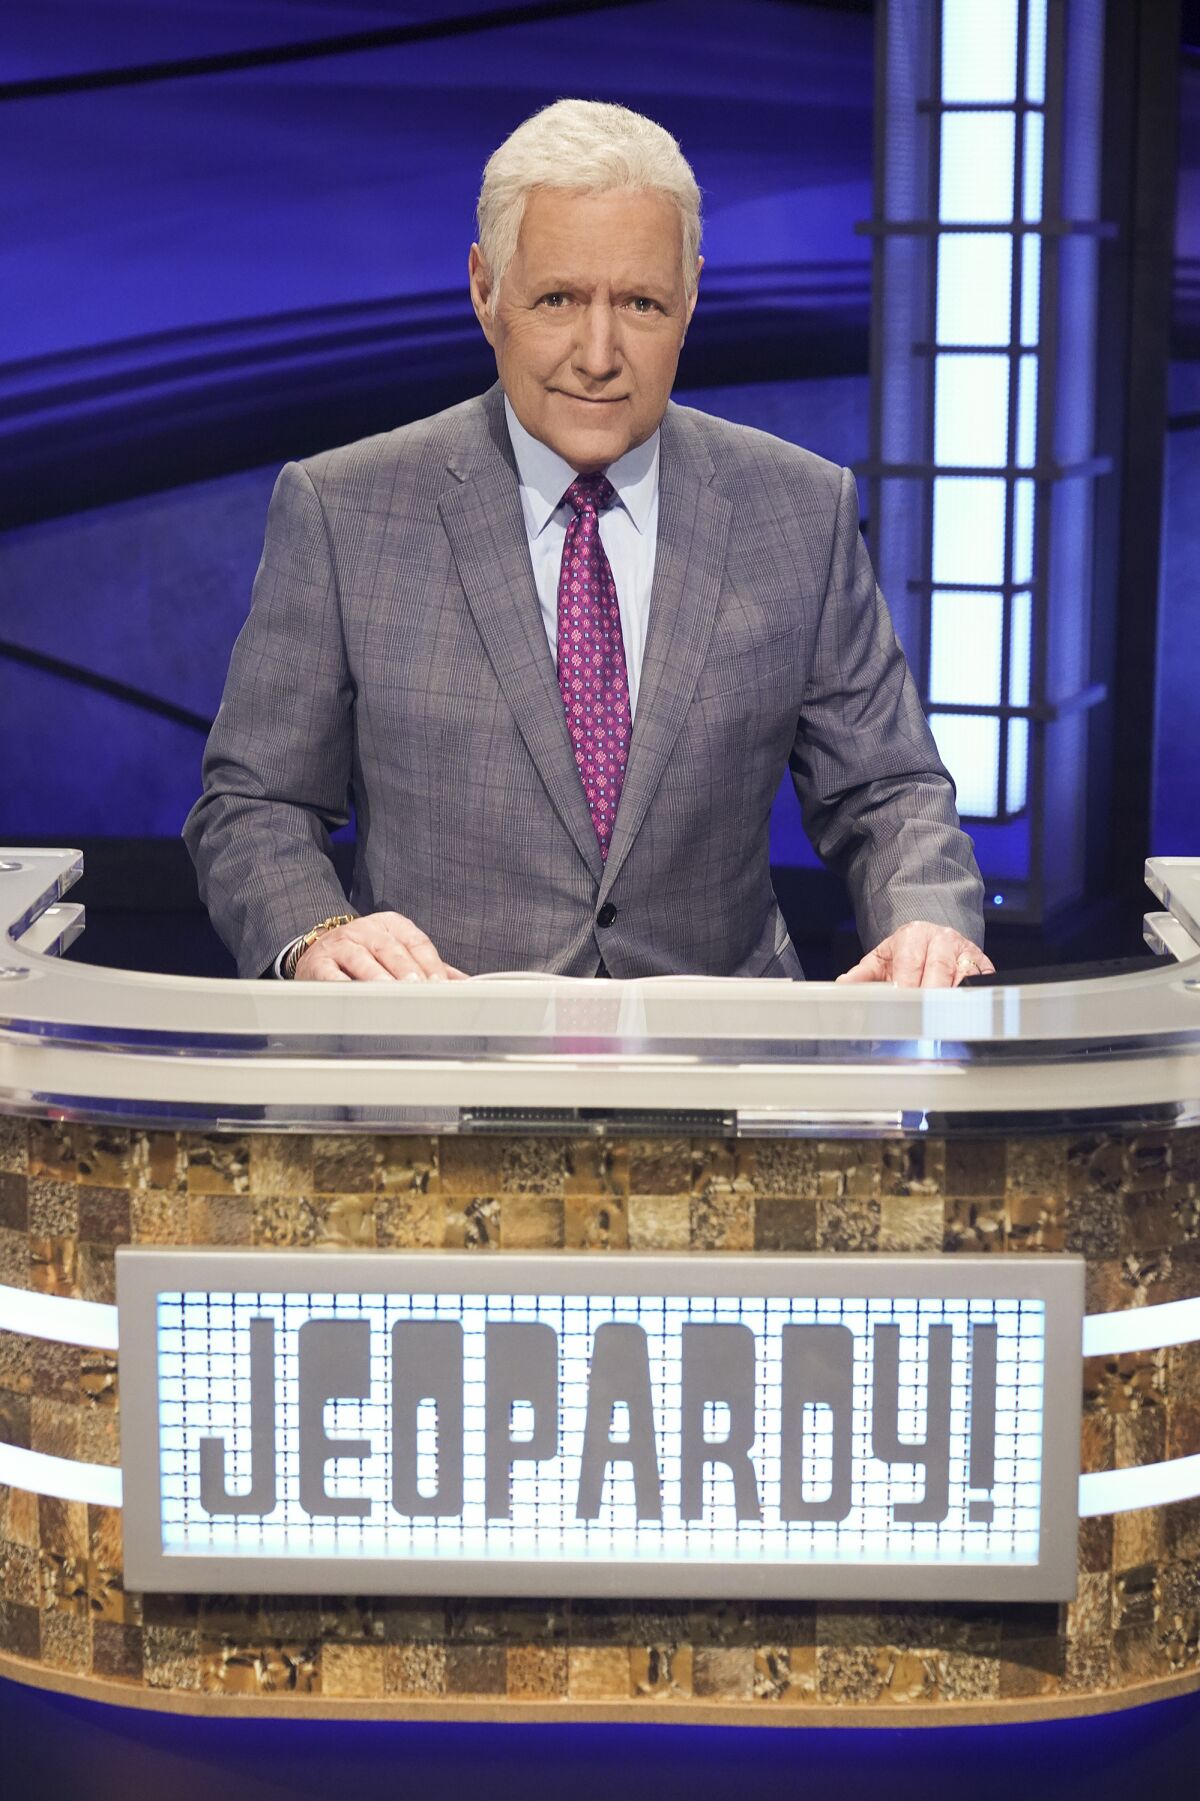 Alex Trebek's upcoming memoir will be published by Simon & Schuster on July 21.